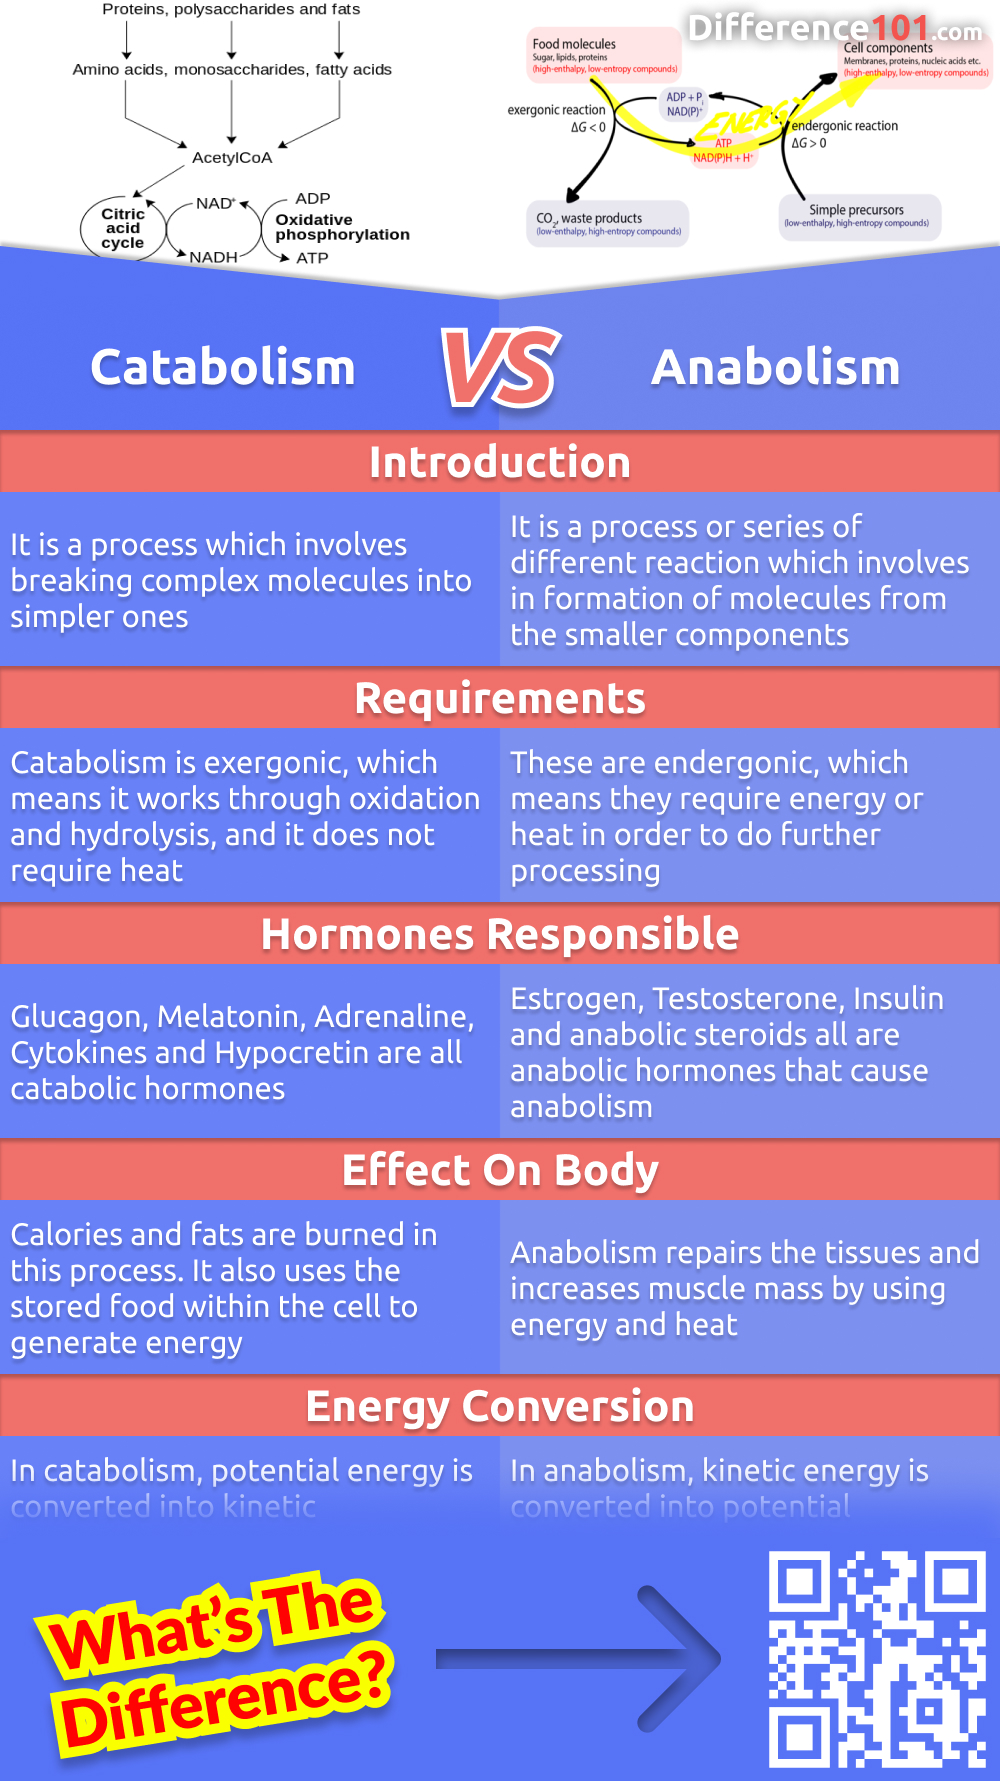 What is the difference between catabolism and anabolism? Both processes are necessary for the body to function properly. Read on to learn more about their differences, pros and cons of each.